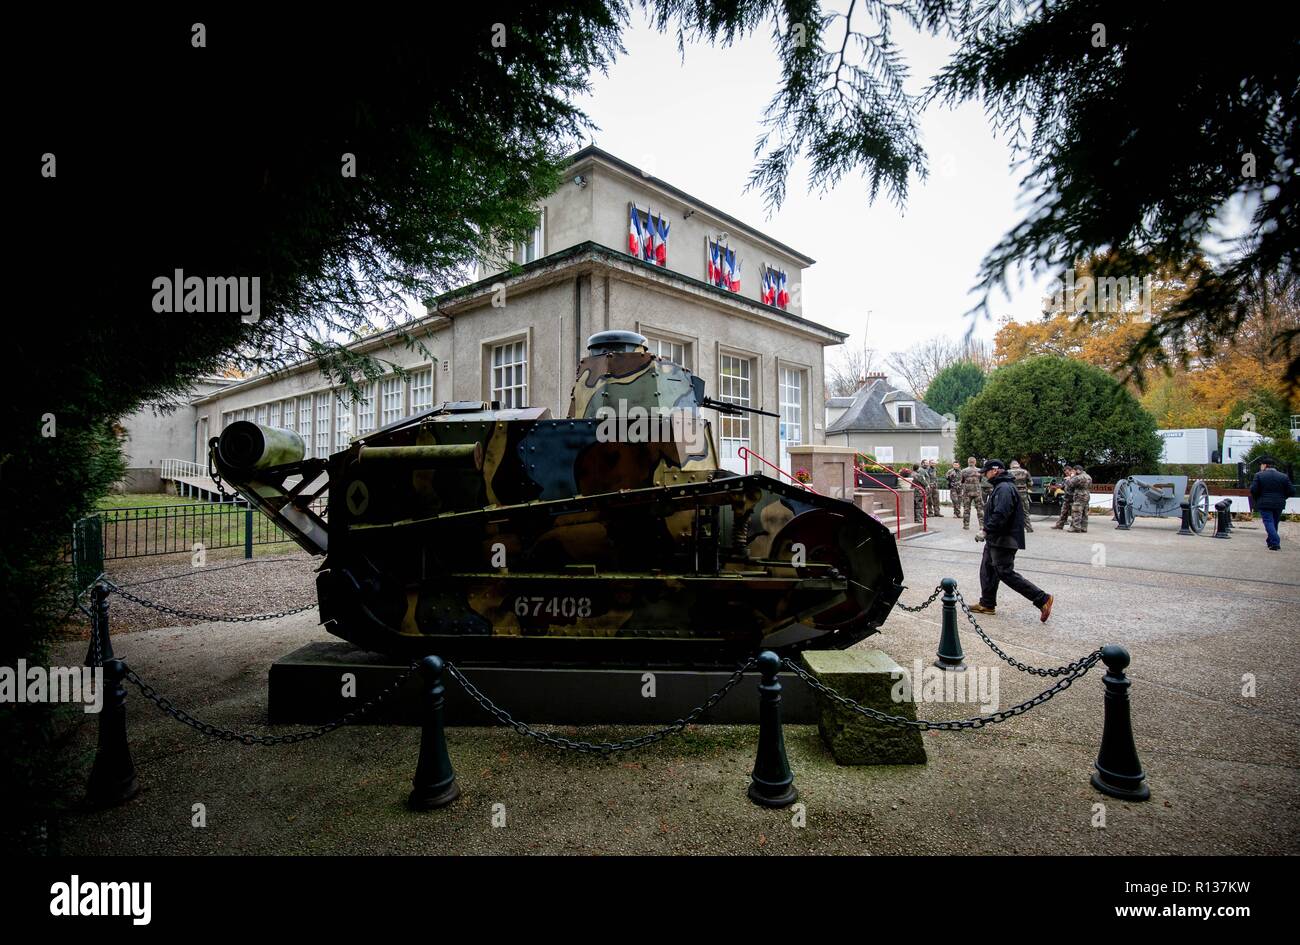 09 November 2018, France (France), Compiègne: 09.11.2018, France, Compiègne: A historical tank stands on the site of the armistice memorial near Compiègne. Chancellor Merkel and French President Macron will meet on 10.11.2018 in Compiègne, the place where the ceasefire was signed, to commemorate the end of the First World War 100 years ago. Photo: Kay Nietfeld/dpa Stock Photo